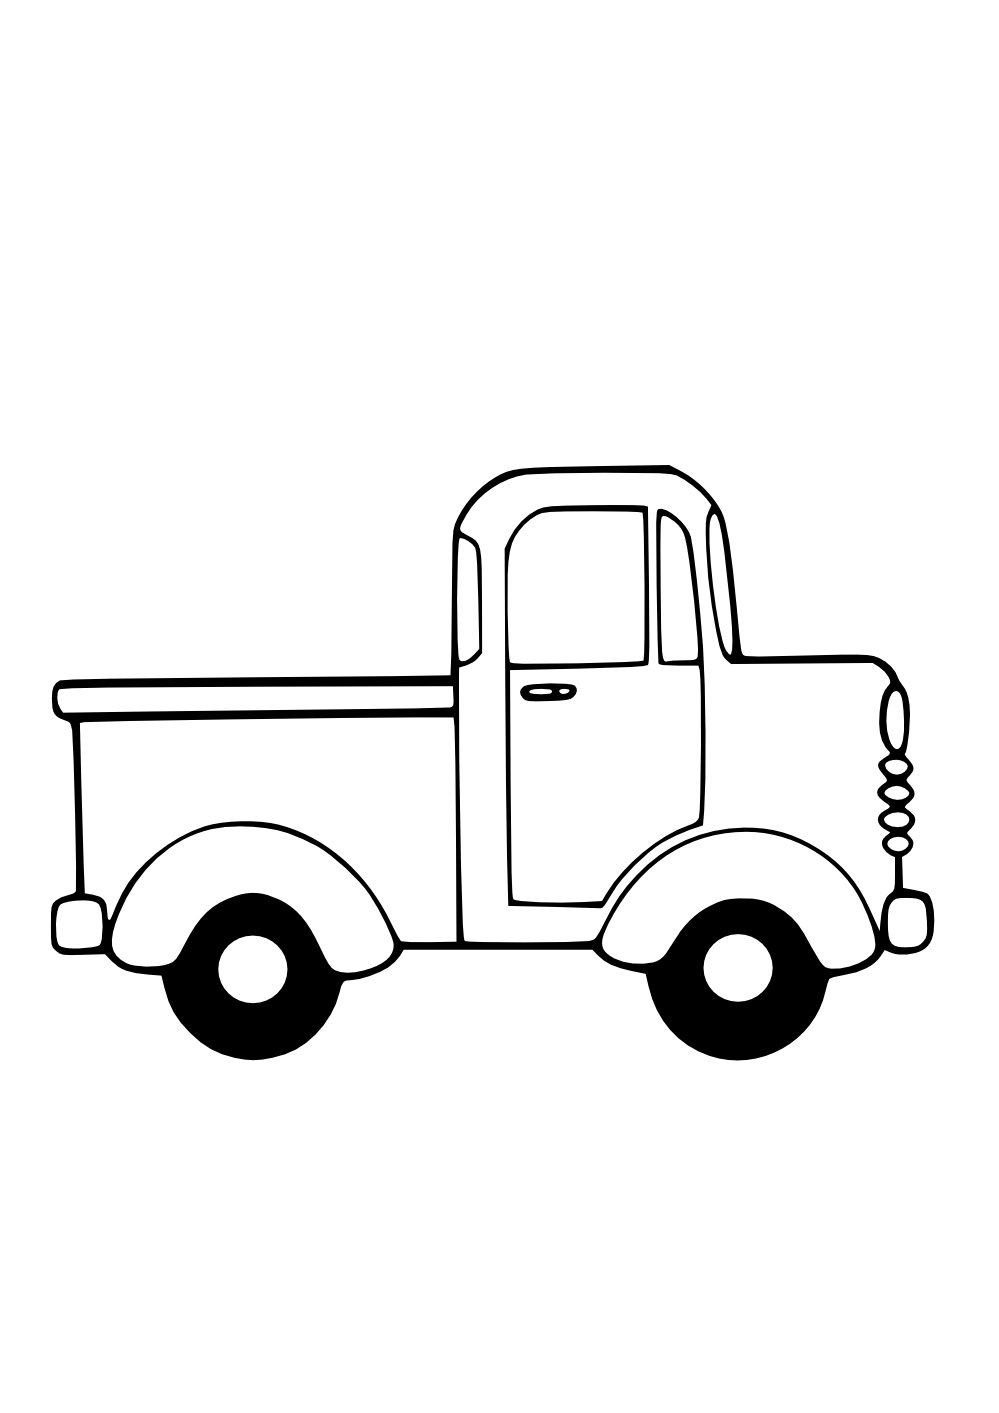 Truck black and white. Helicopter clipart color